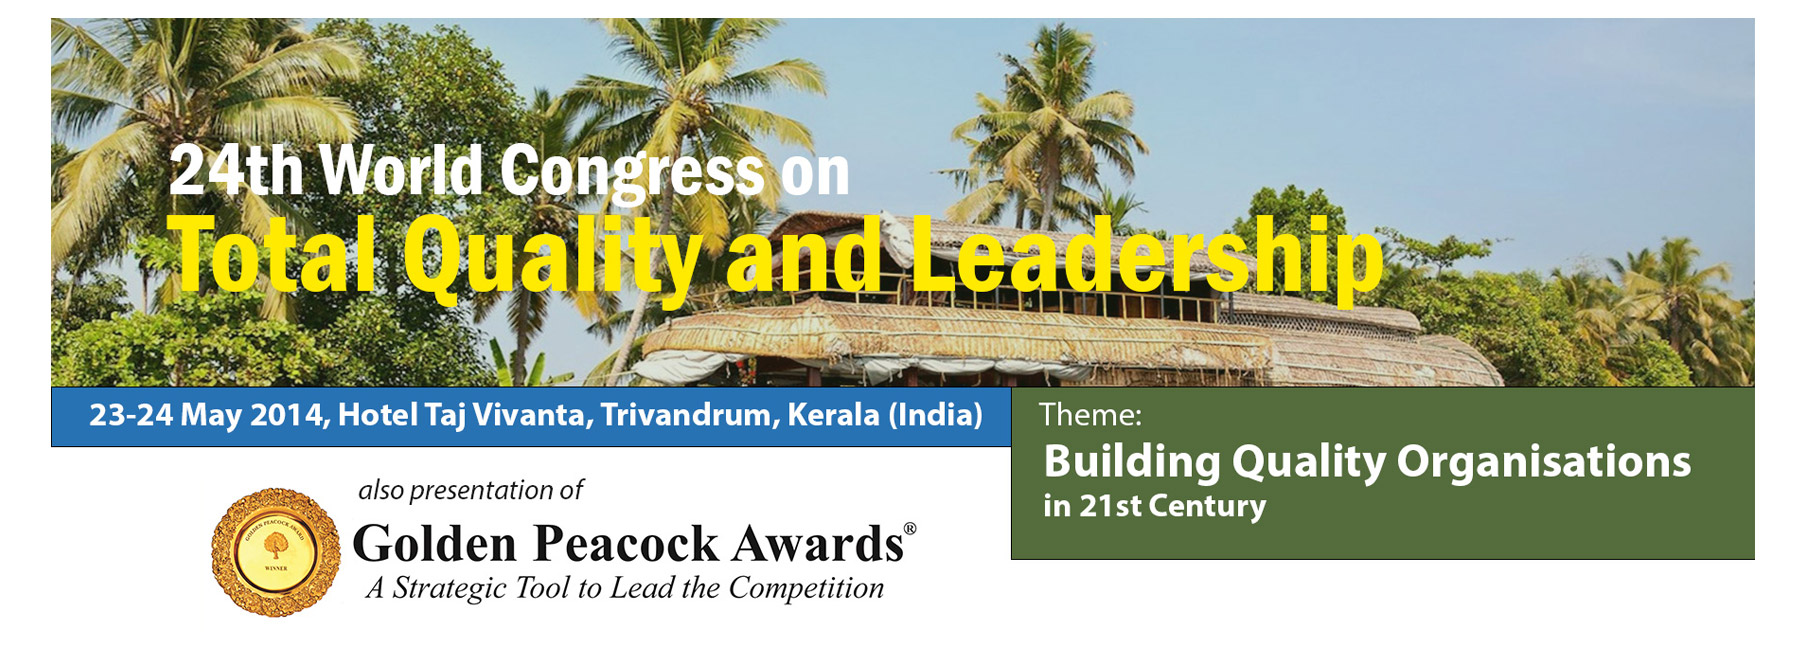 24th World Congress on Total Quality and Leadership